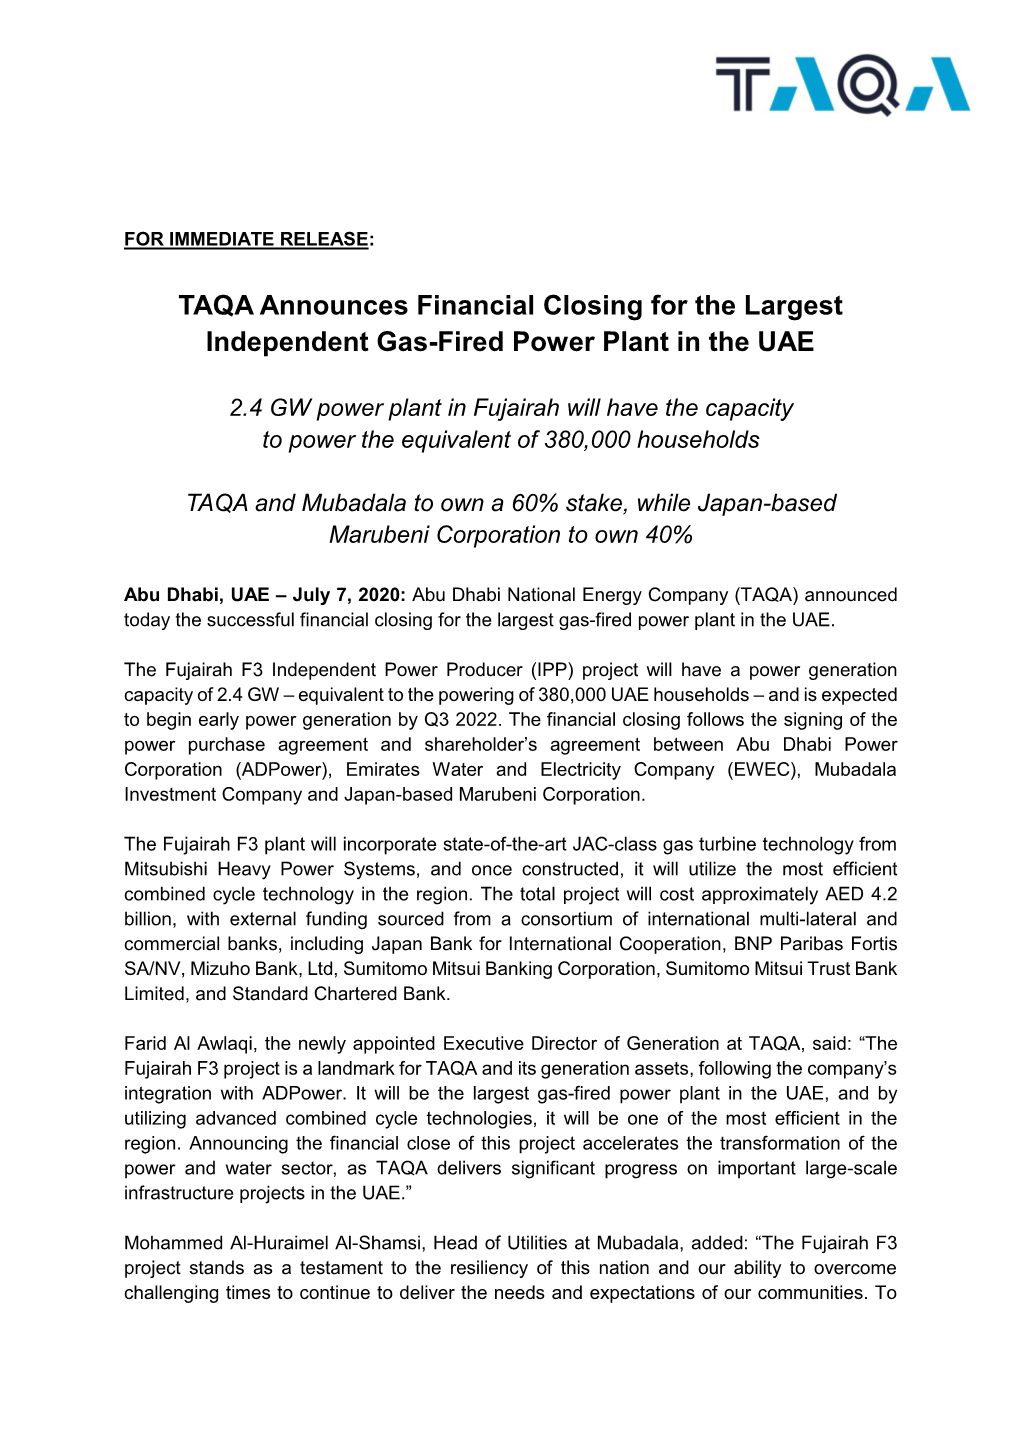 TAQA Announces Financial Closing for the Largest Independent Gas-Fired Power Plant in the UAE